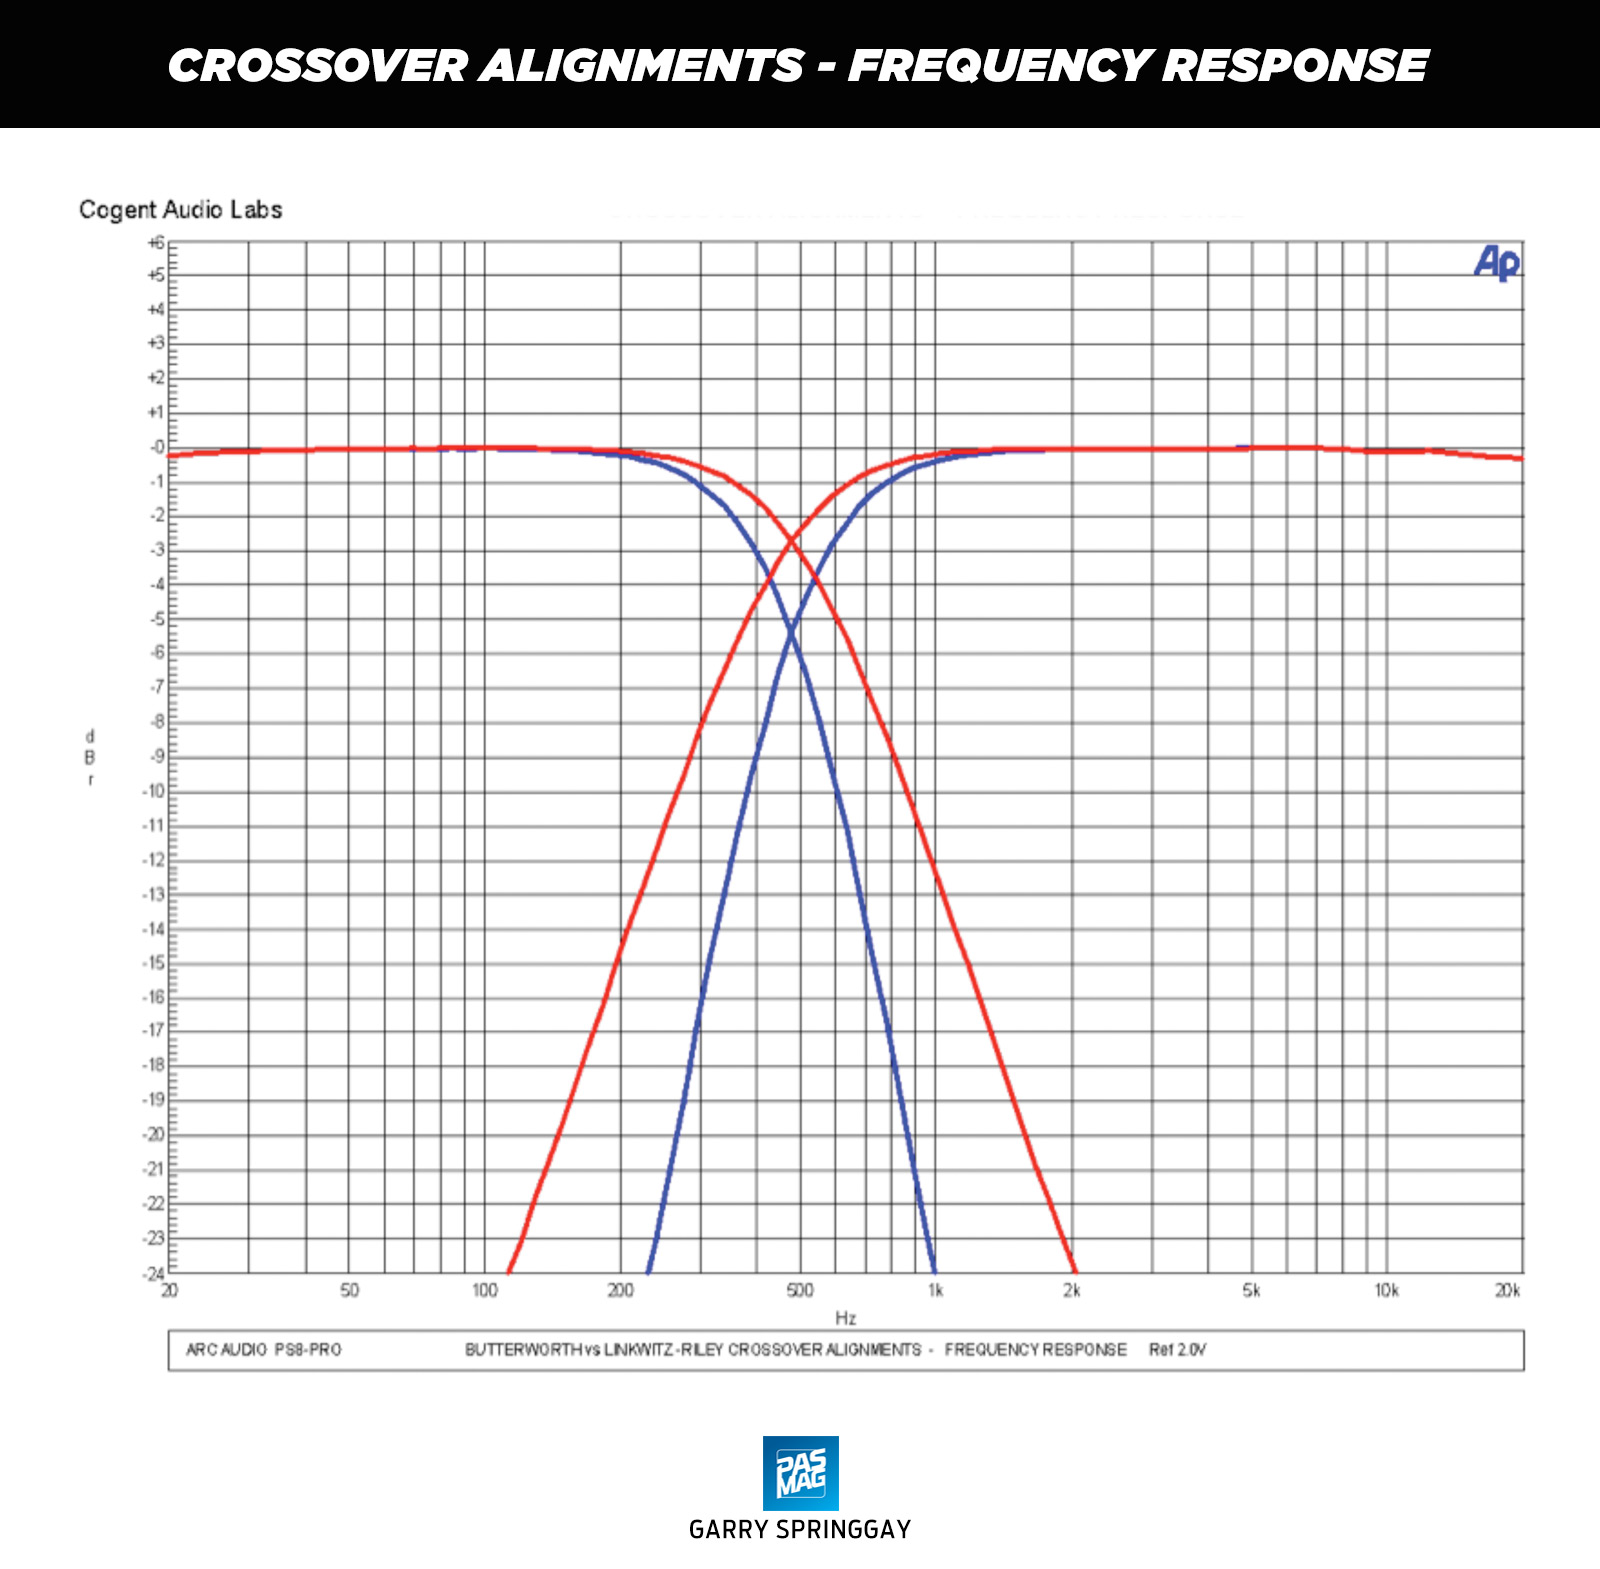 10 Arc Audio PS8 Pro Chart Crossover Alignments Frequency Response